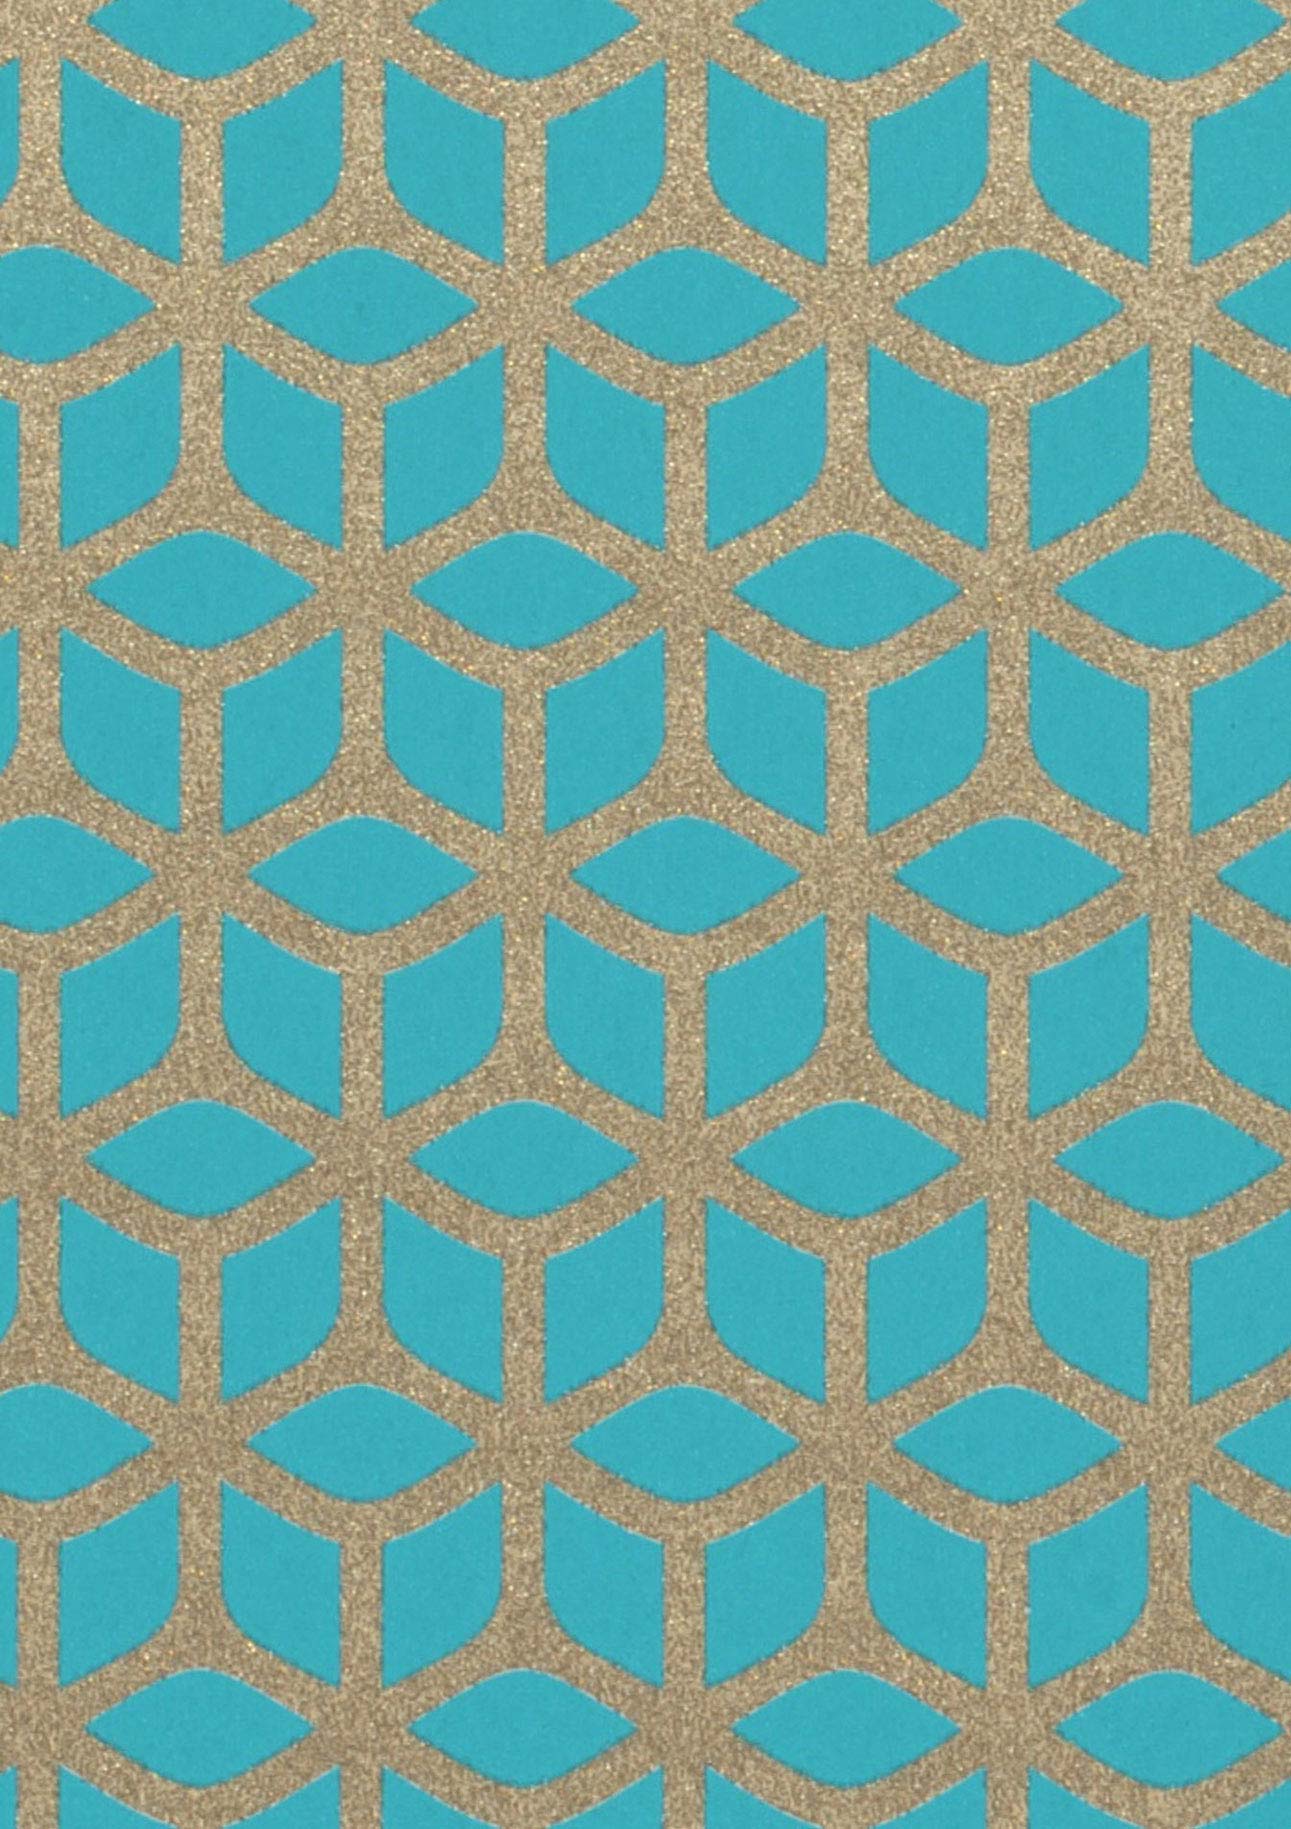 Zelor Turquoise Wallpaper Additional From